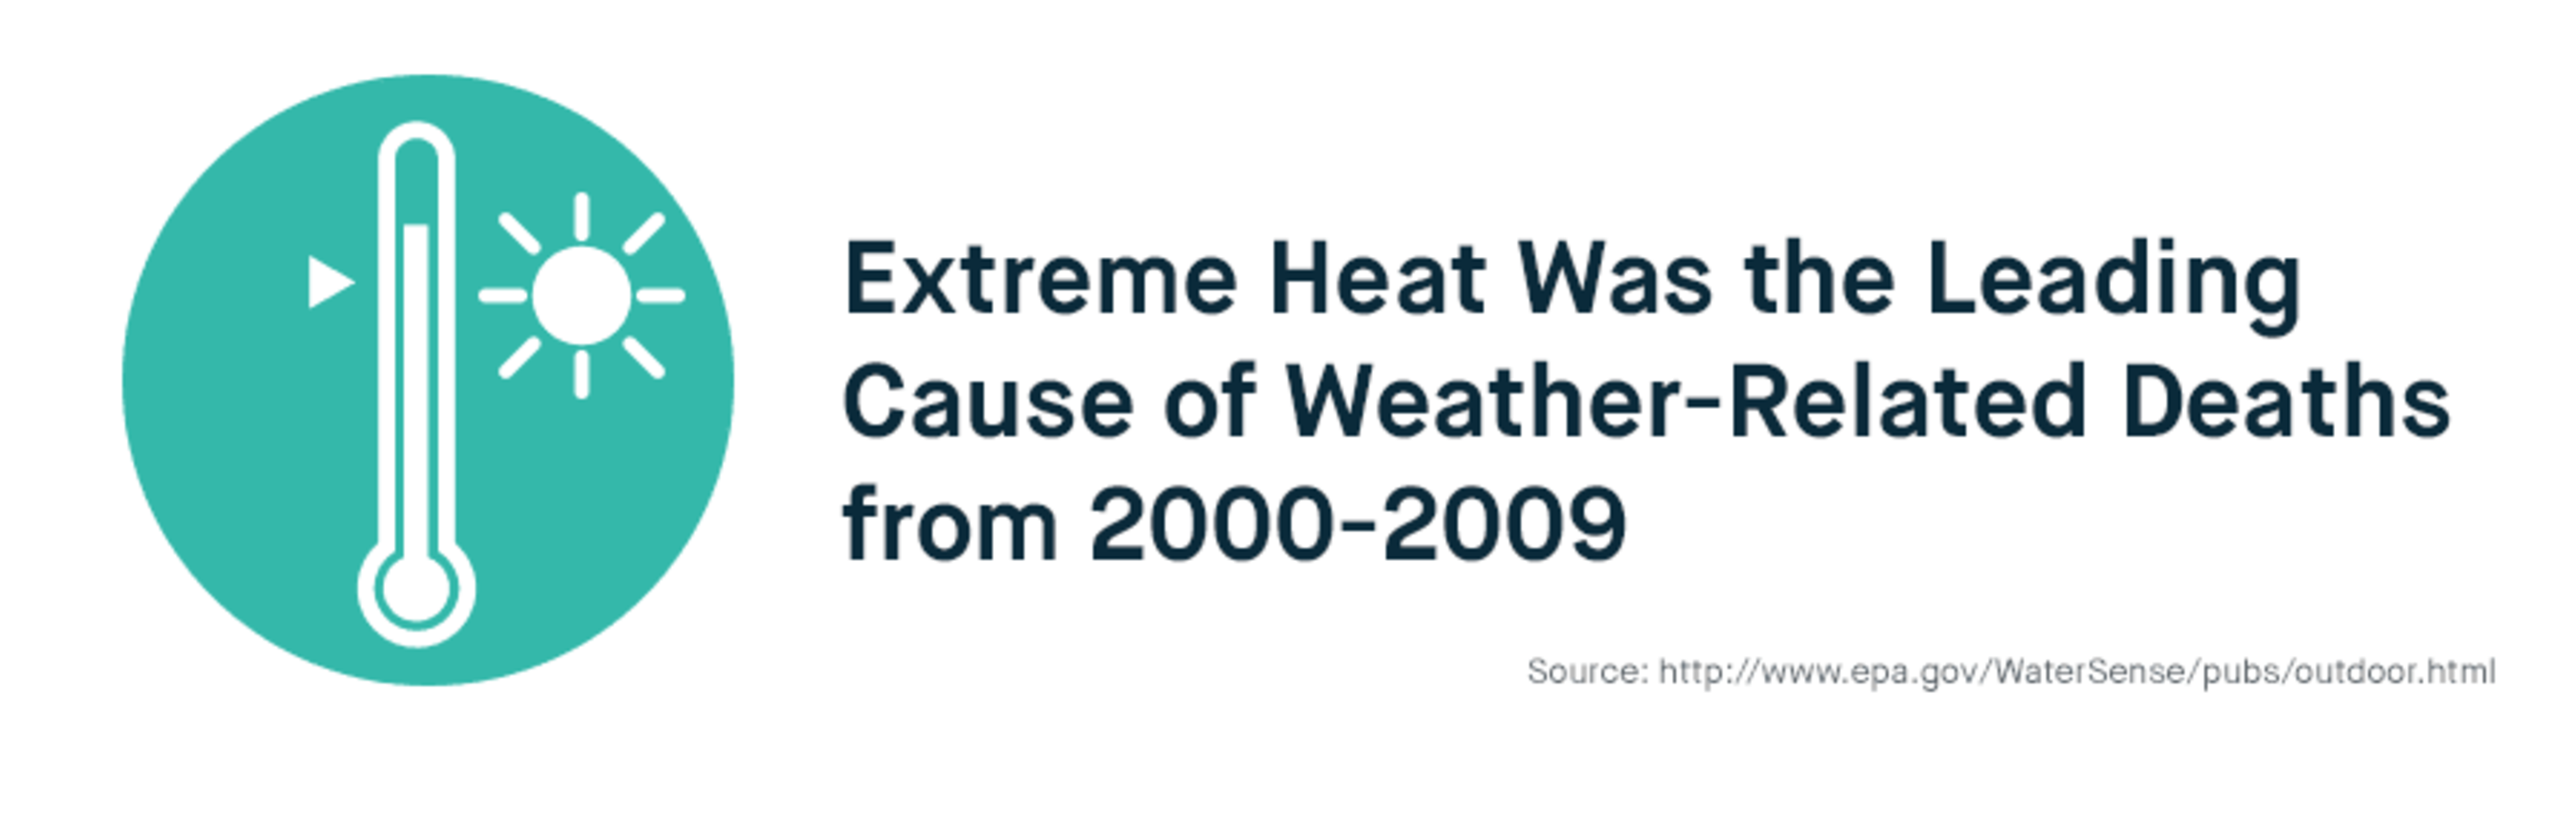 Extreme Heat was the leading cause of weather related deaths